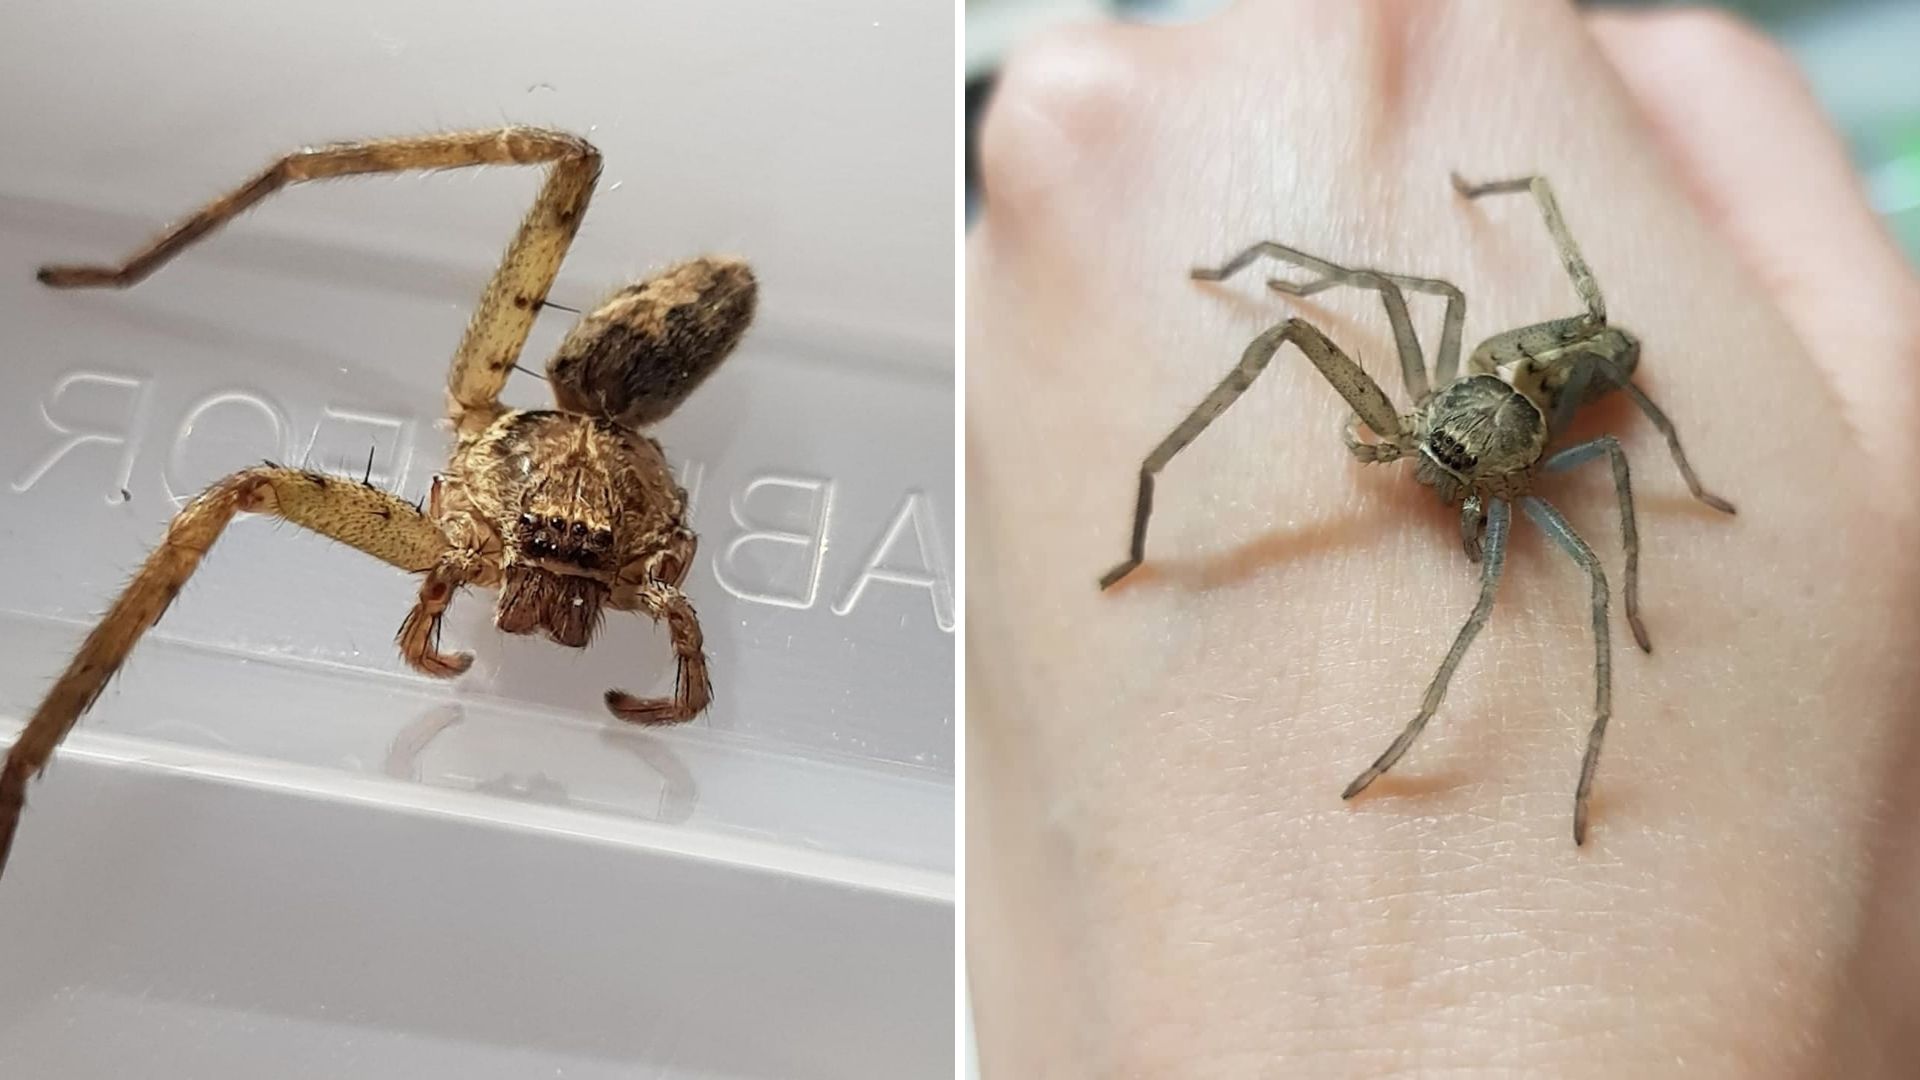 On the left is Peggy when Elina found her, on the right is Peggy after regrowing her legs.